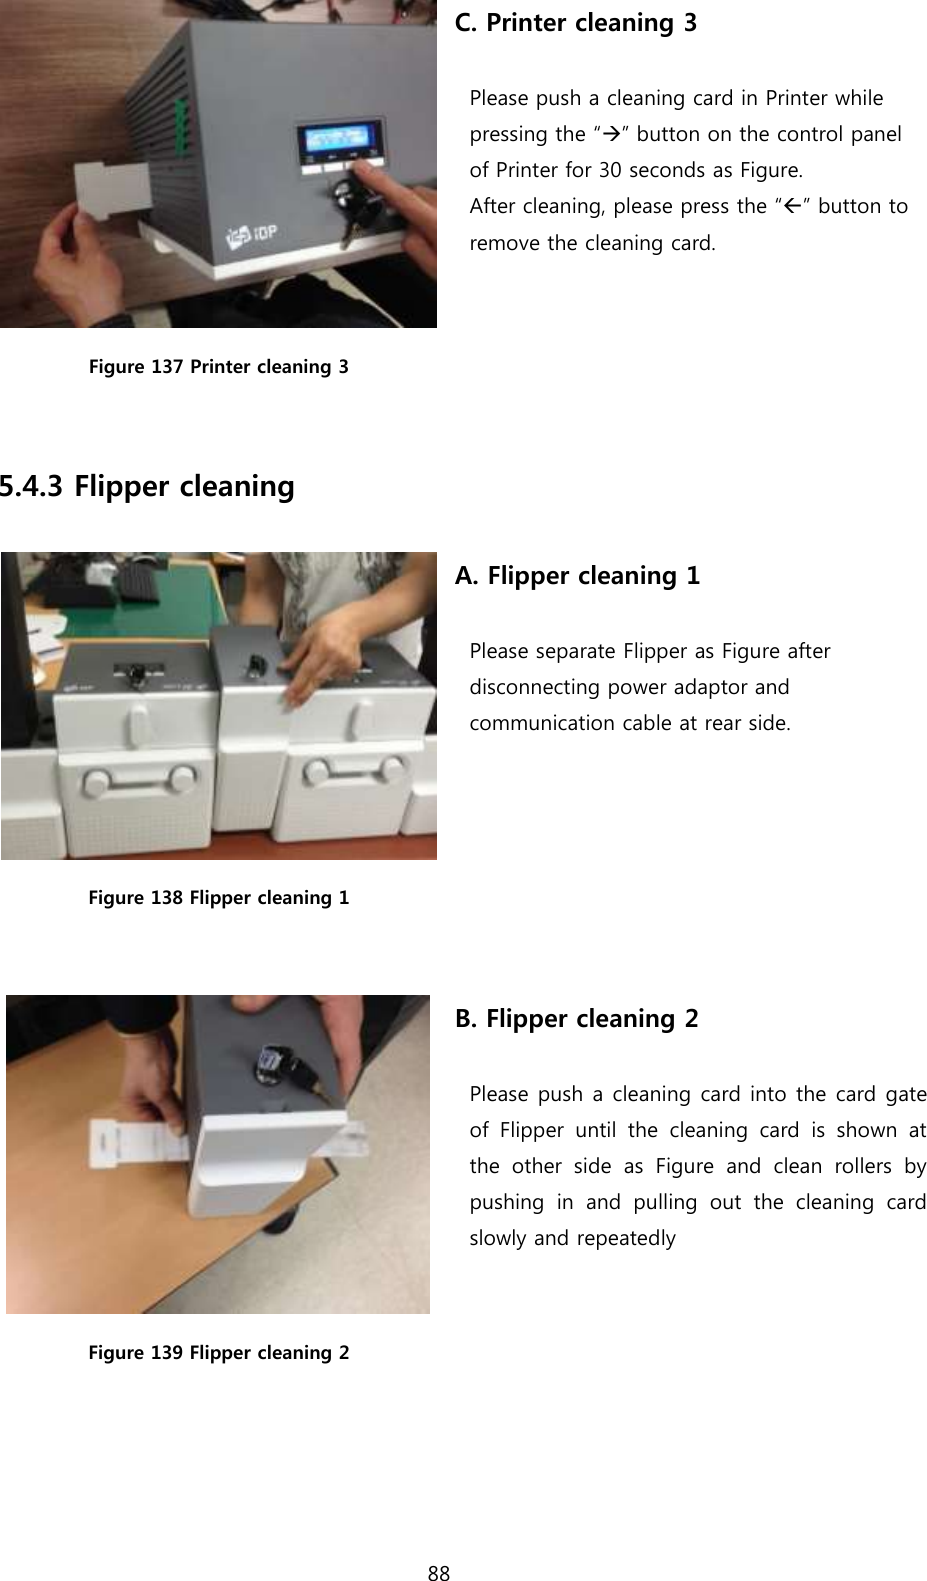 88   Figure 137 Printer cleaning 3 C. Printer cleaning 3  Please push a cleaning card in Printer while   pressing the “” button on the control panel   of Printer for 30 seconds as Figure.   After cleaning, please press the “” button to   remove the cleaning card.  5.4.3 Flipper cleaning   Figure 138 Flipper cleaning 1  A. Flipper cleaning 1  Please separate Flipper as Figure after   disconnecting power adaptor and   communication cable at rear side.  Figure 139 Flipper cleaning 2 B. Flipper cleaning 2  Please push a cleaning card into the card gate of  Flipper  until  the  cleaning  card  is  shown  at the  other  side  as  Figure  and  clean  rollers  by pushing  in  and  pulling  out  the  cleaning  card slowly and repeatedly     